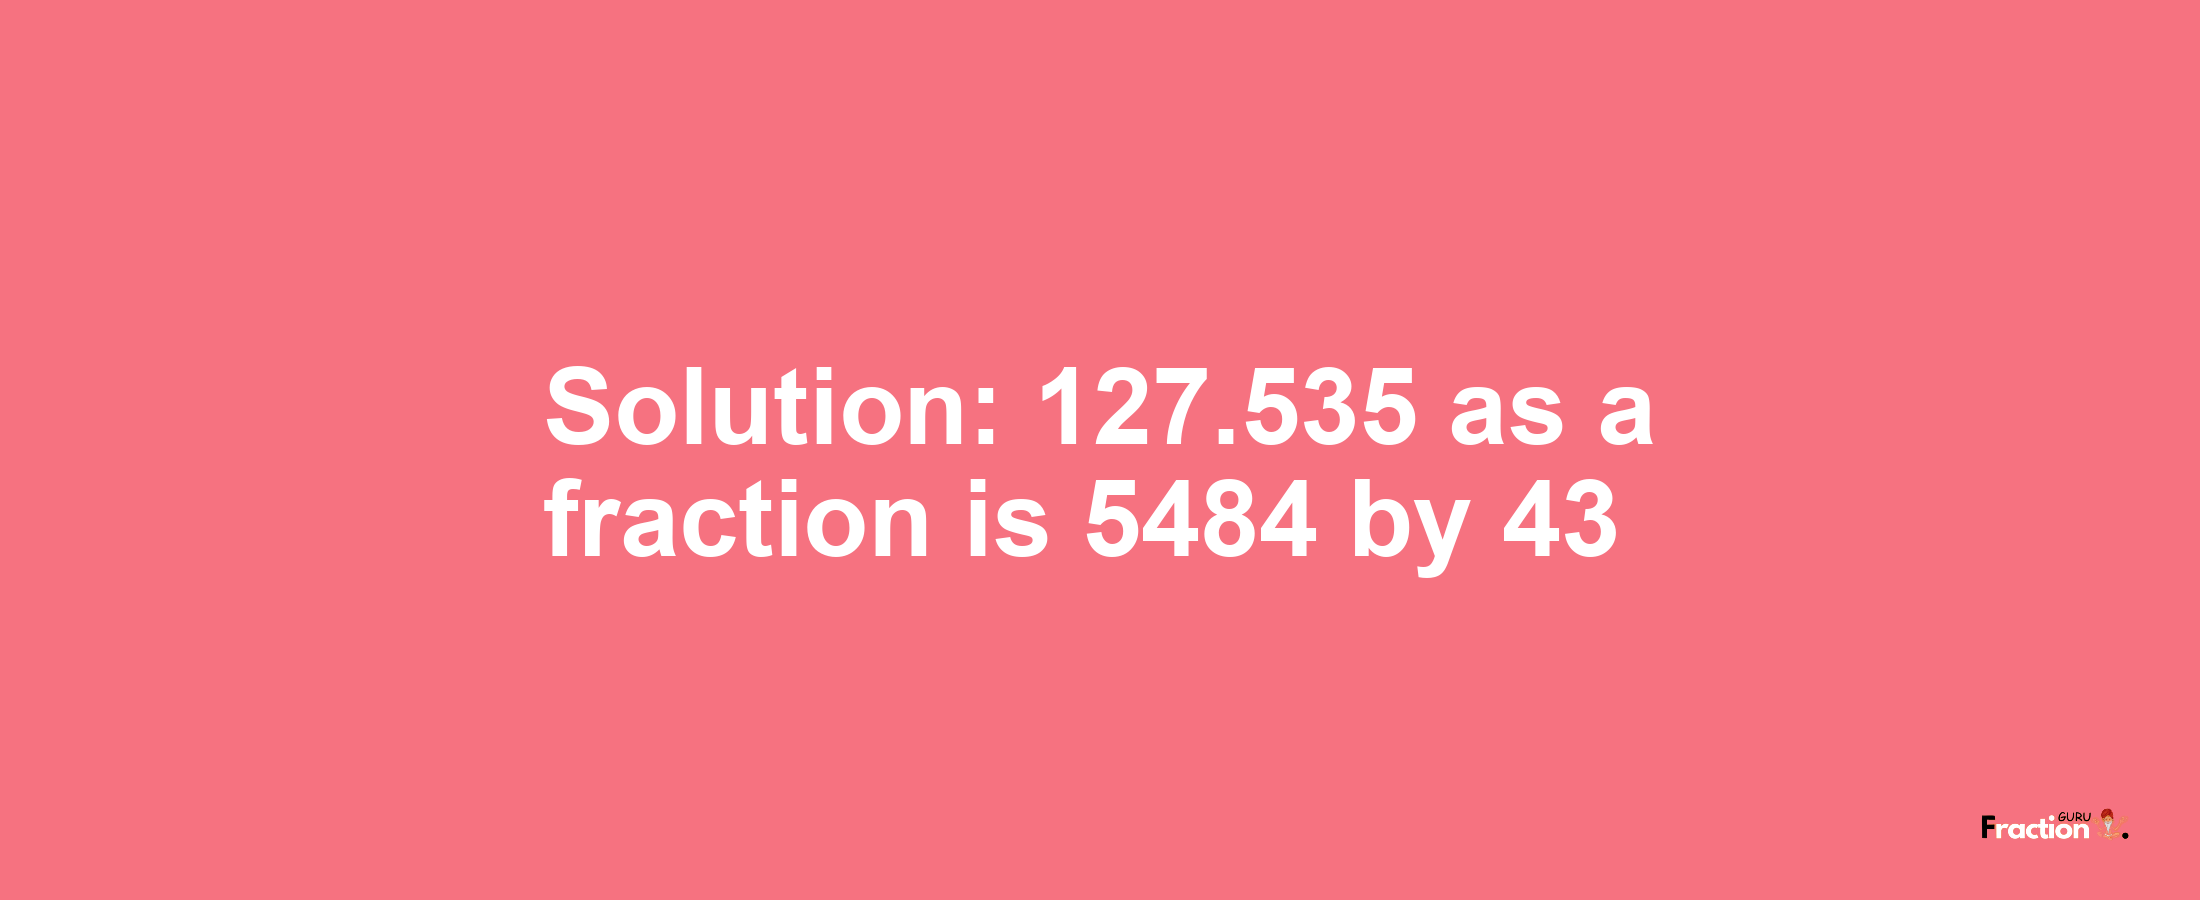 Solution:127.535 as a fraction is 5484/43